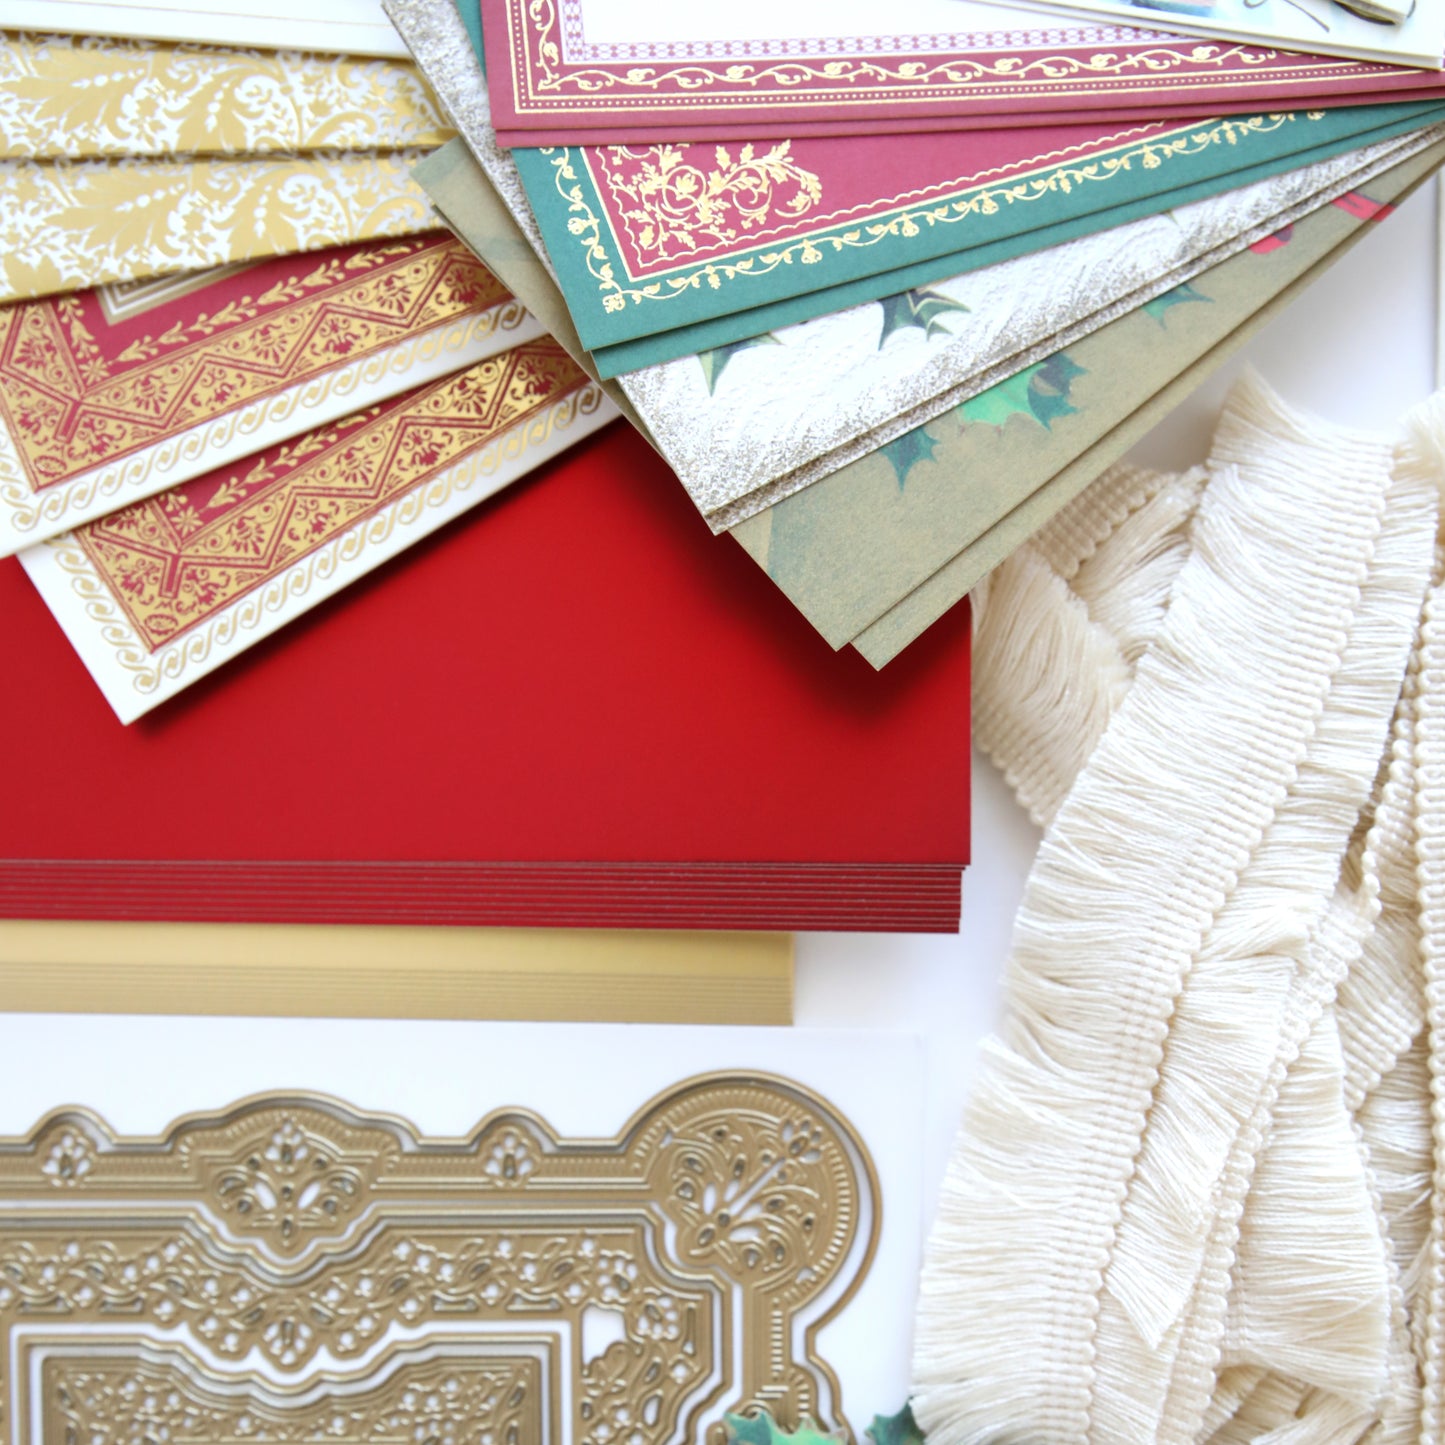 A variety of Anna Griffin Victorian Christmas Class Materials and Dies are laid out on a table, ready to be used for creating beautiful Christmas cards.